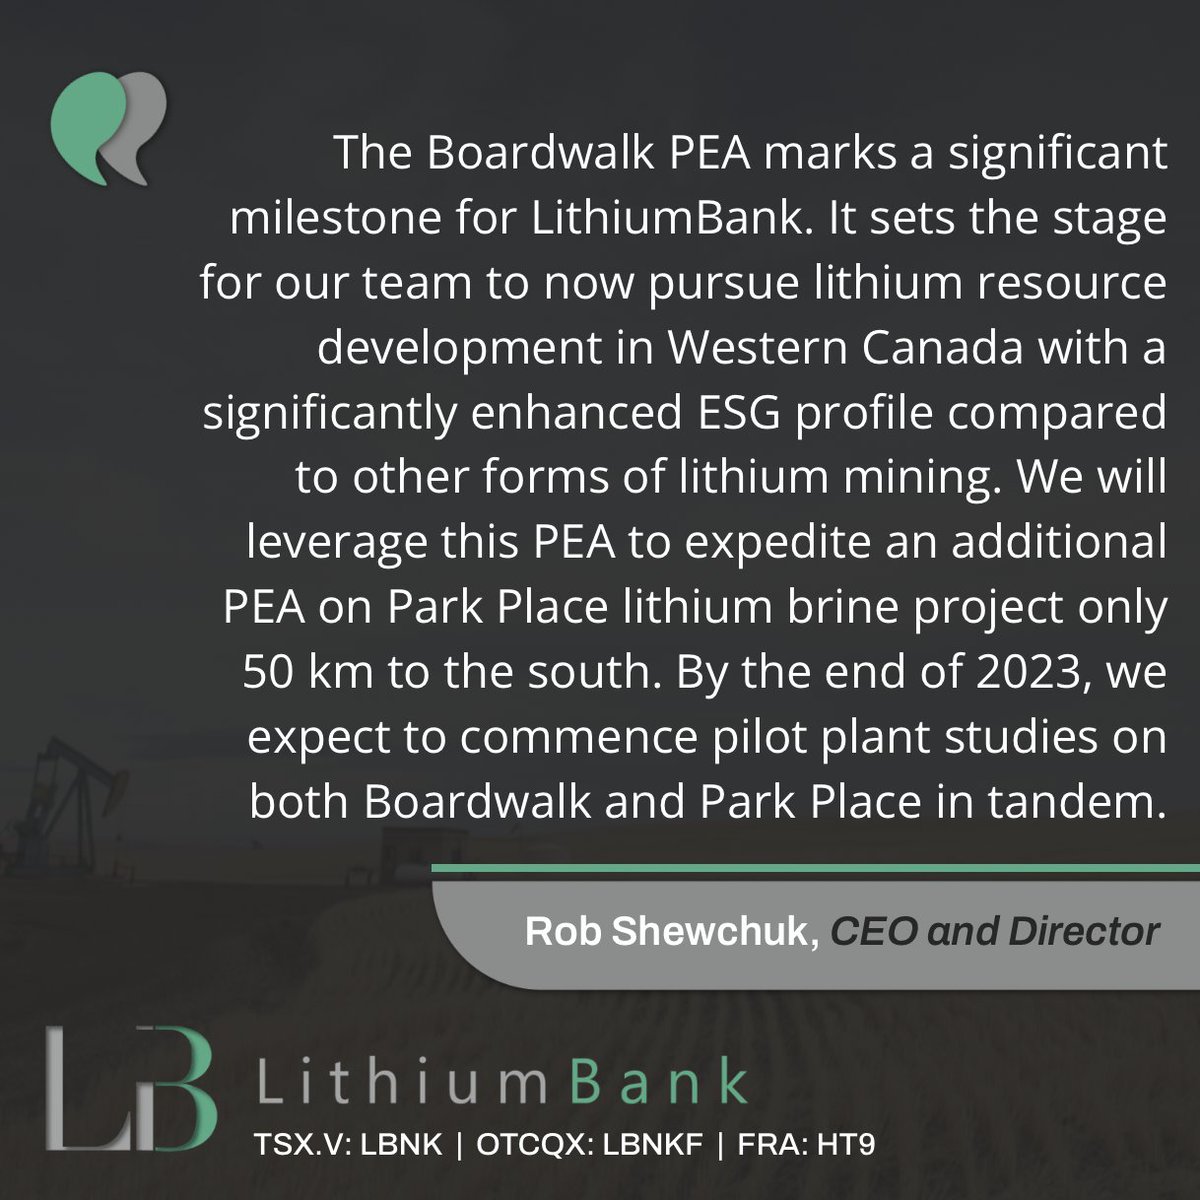 [NEWS] LithiumBank Reports US$2.7 Billion Pre Tax NPV From Preliminary Economic Assessment on a 31,350 TPA LHM Operation at Boardwalk Lithium Brine Project, Alberta, Canada 

Read More 📄  bit.ly/3MB2MJf

$LBNK #Lithium #Li